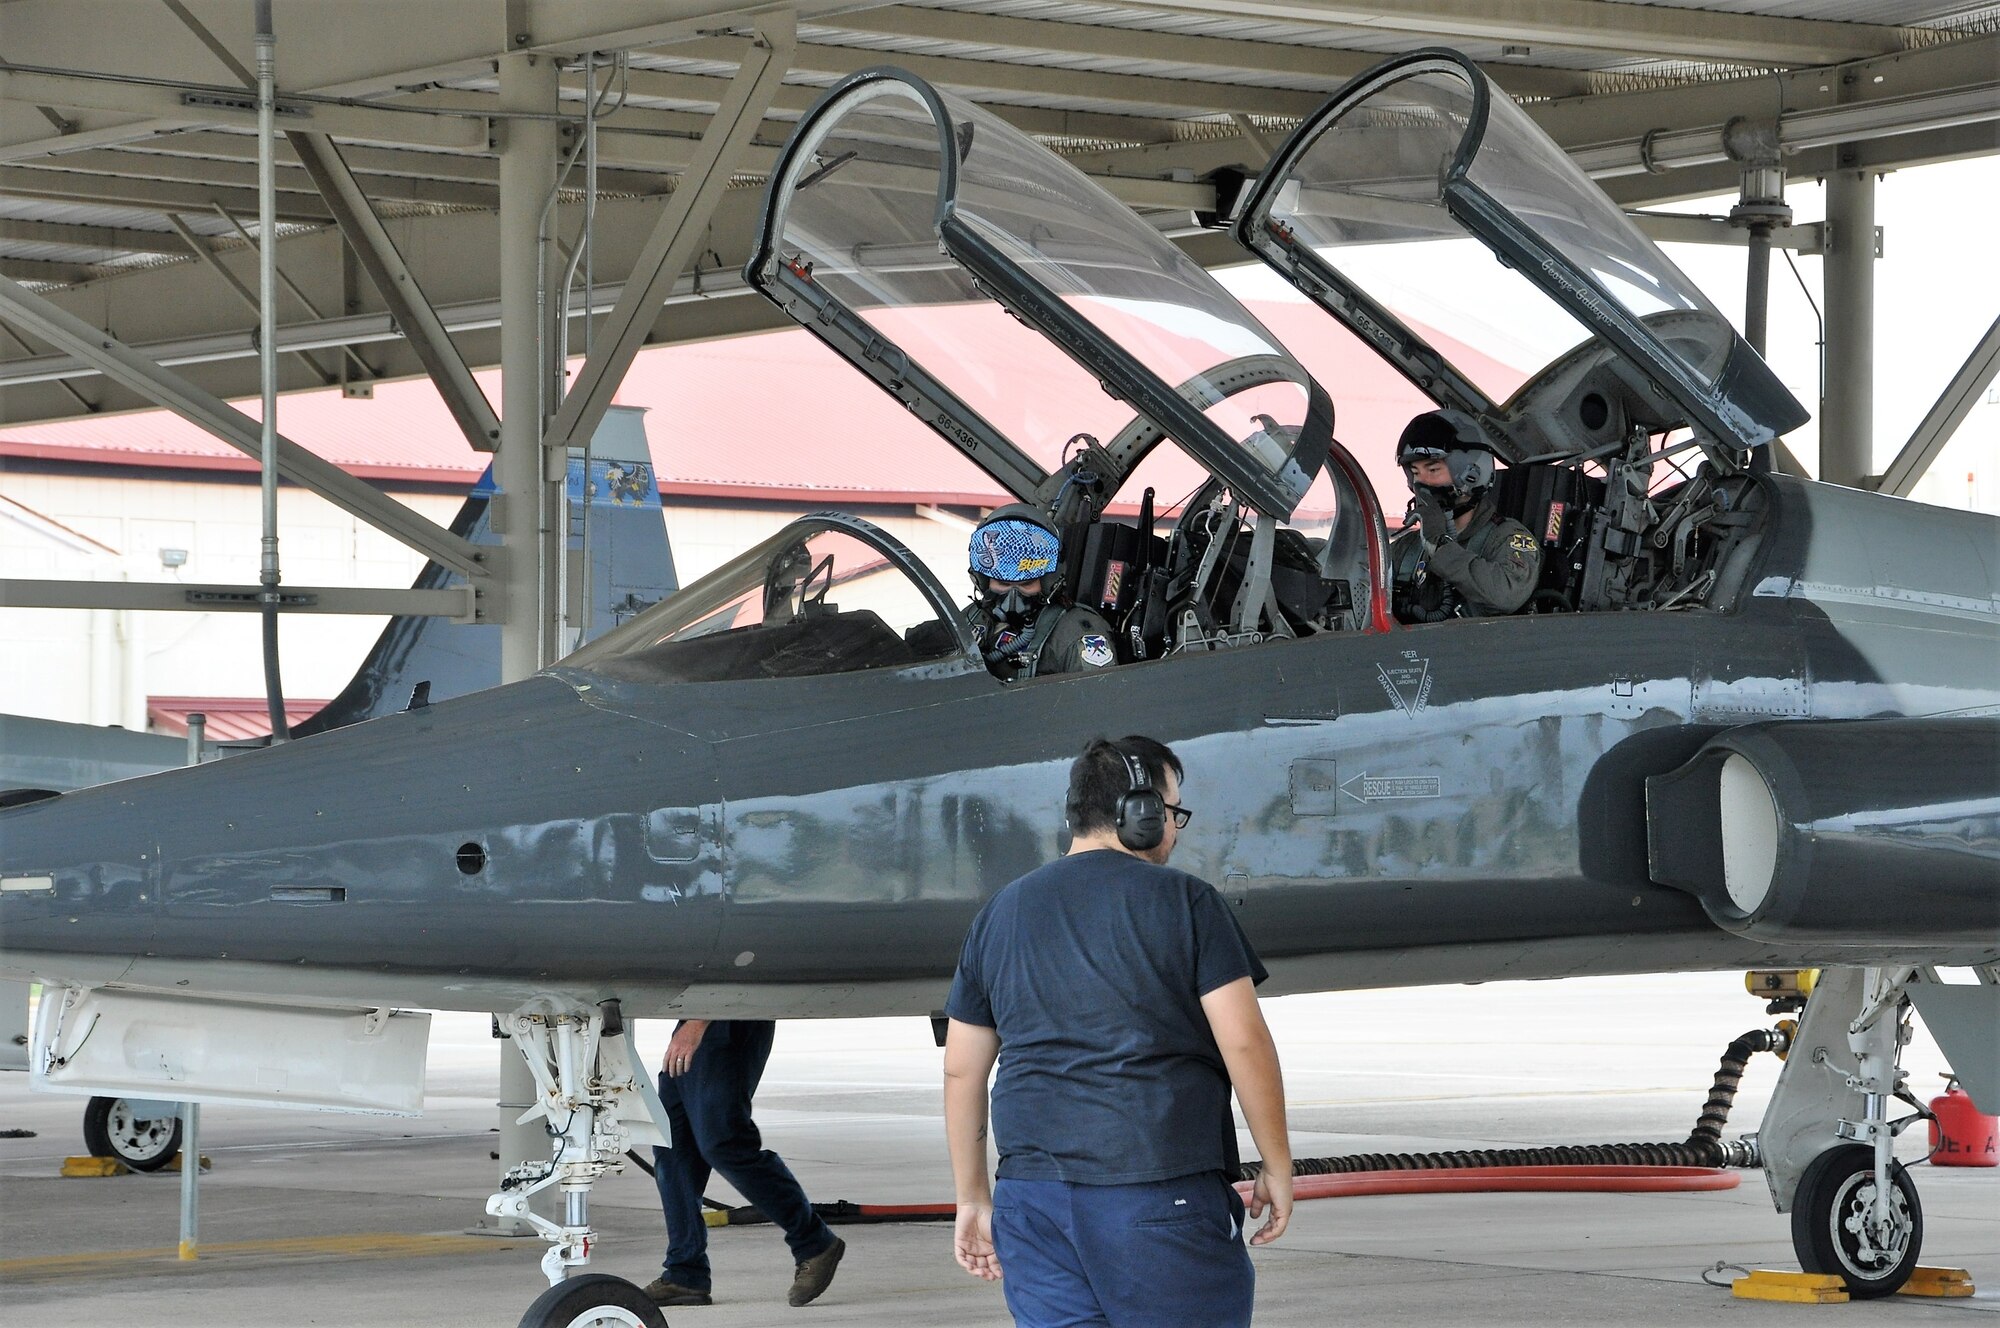 39th FTS pilots prepare to deplane after another successful Cobra in the Sky exercise. (U.S. Air Force photo by Janis El Shabazz)